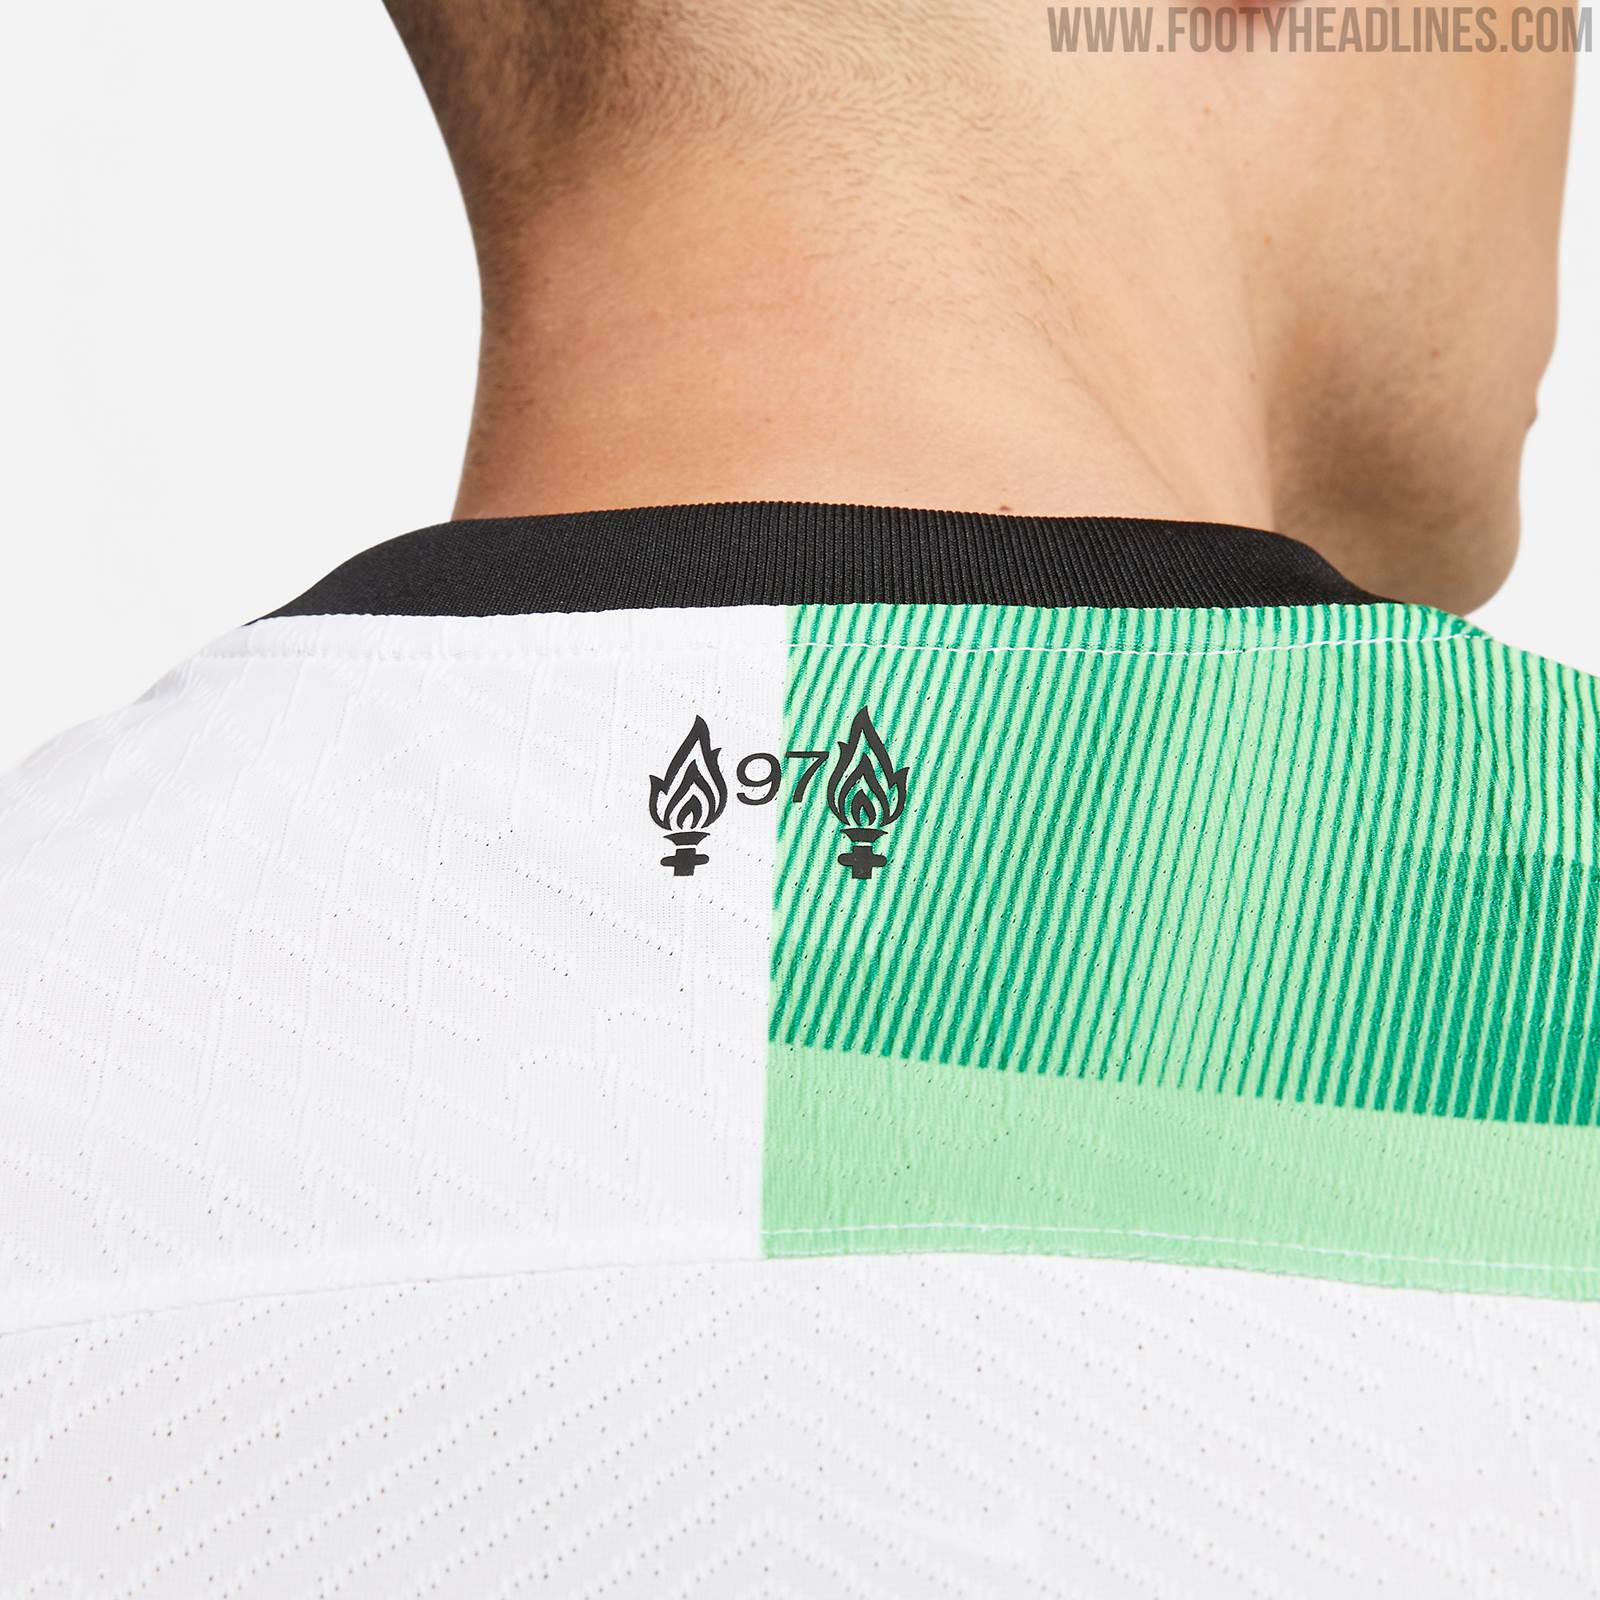 NEW: New images of Liverpool away kit 23/24 - DaveOCKOP